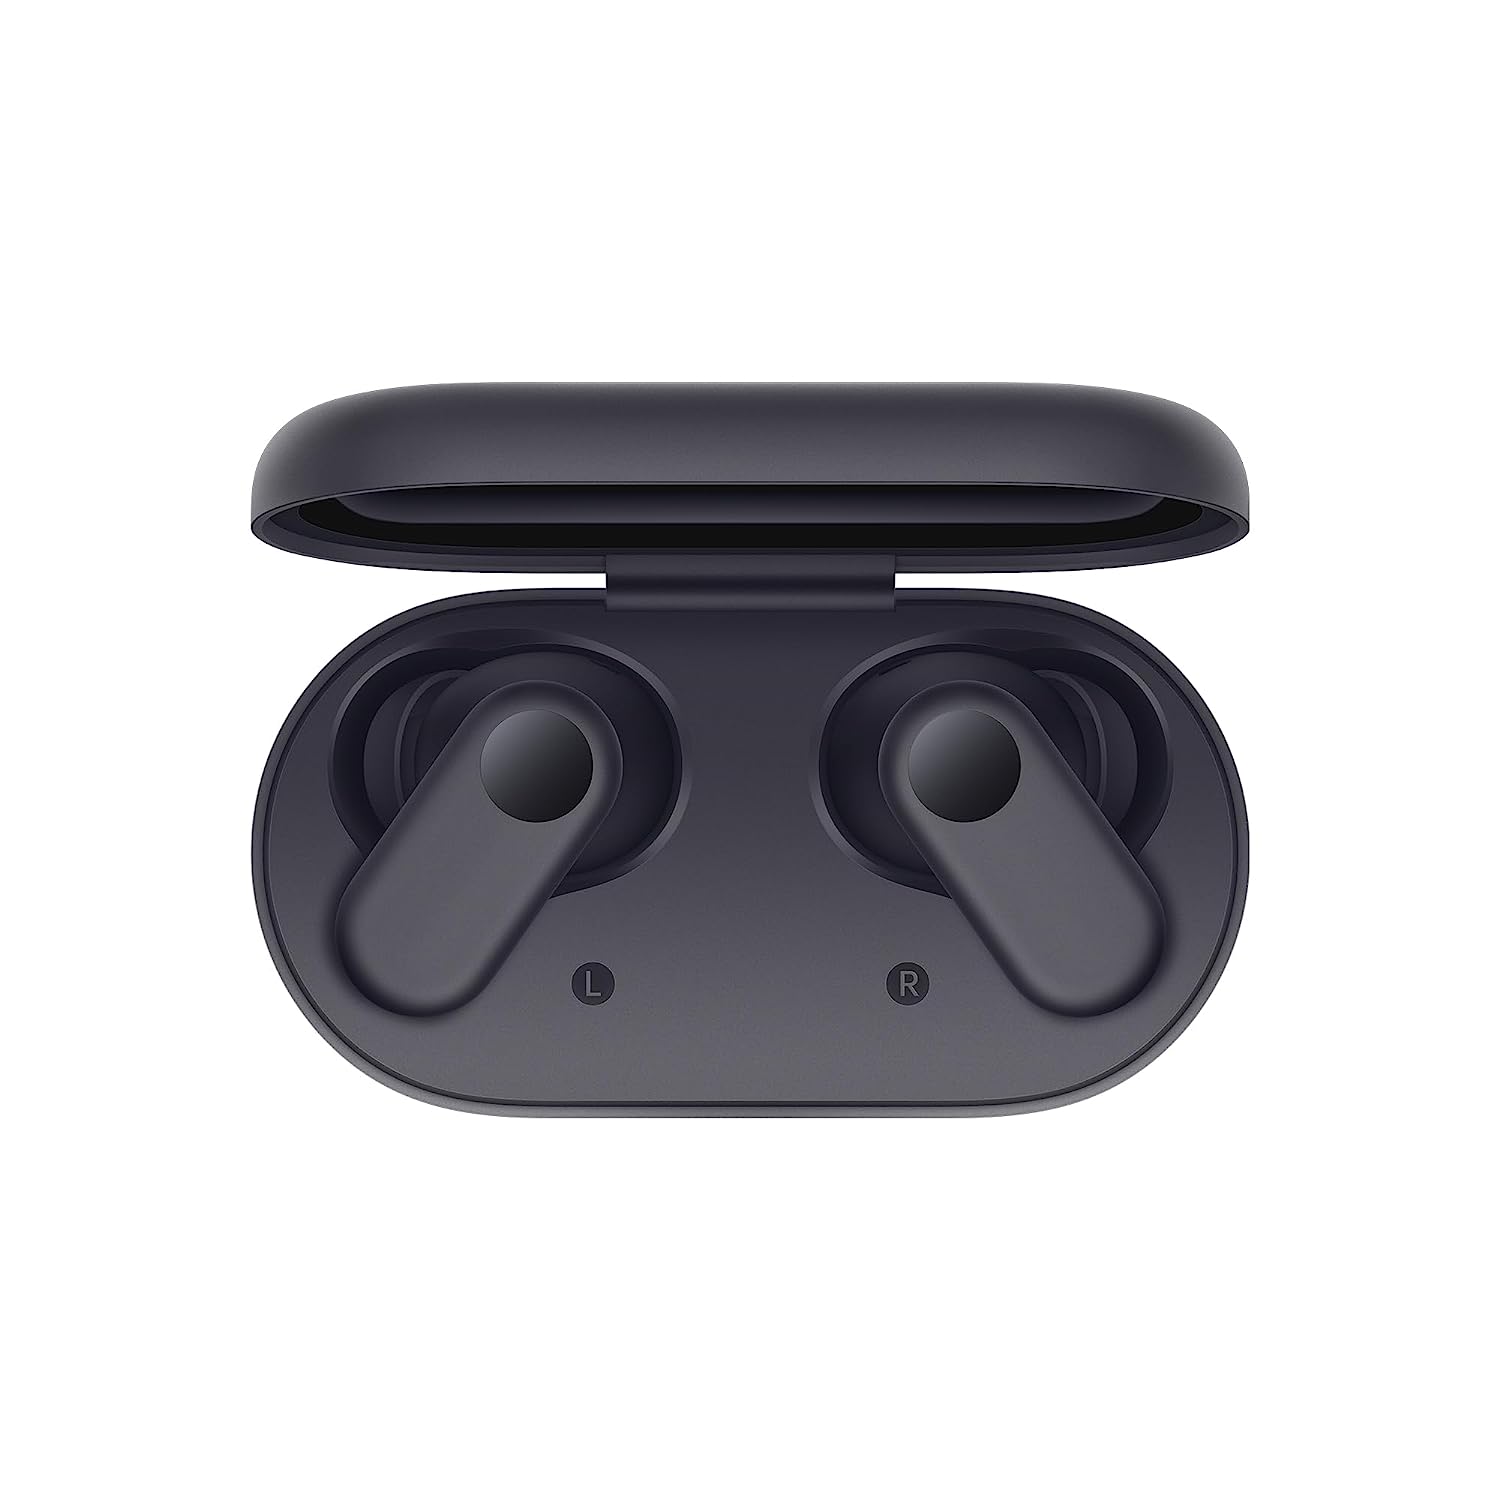 OnePlus Nord Buds 2r True Wireless in Ear Earbuds with Mic, 12.4mm Drivers, Playback:Upto 38hr case,4-Mic Design, IP55 Rating [Deep Grey]. @INR 1999 with Bank Offer